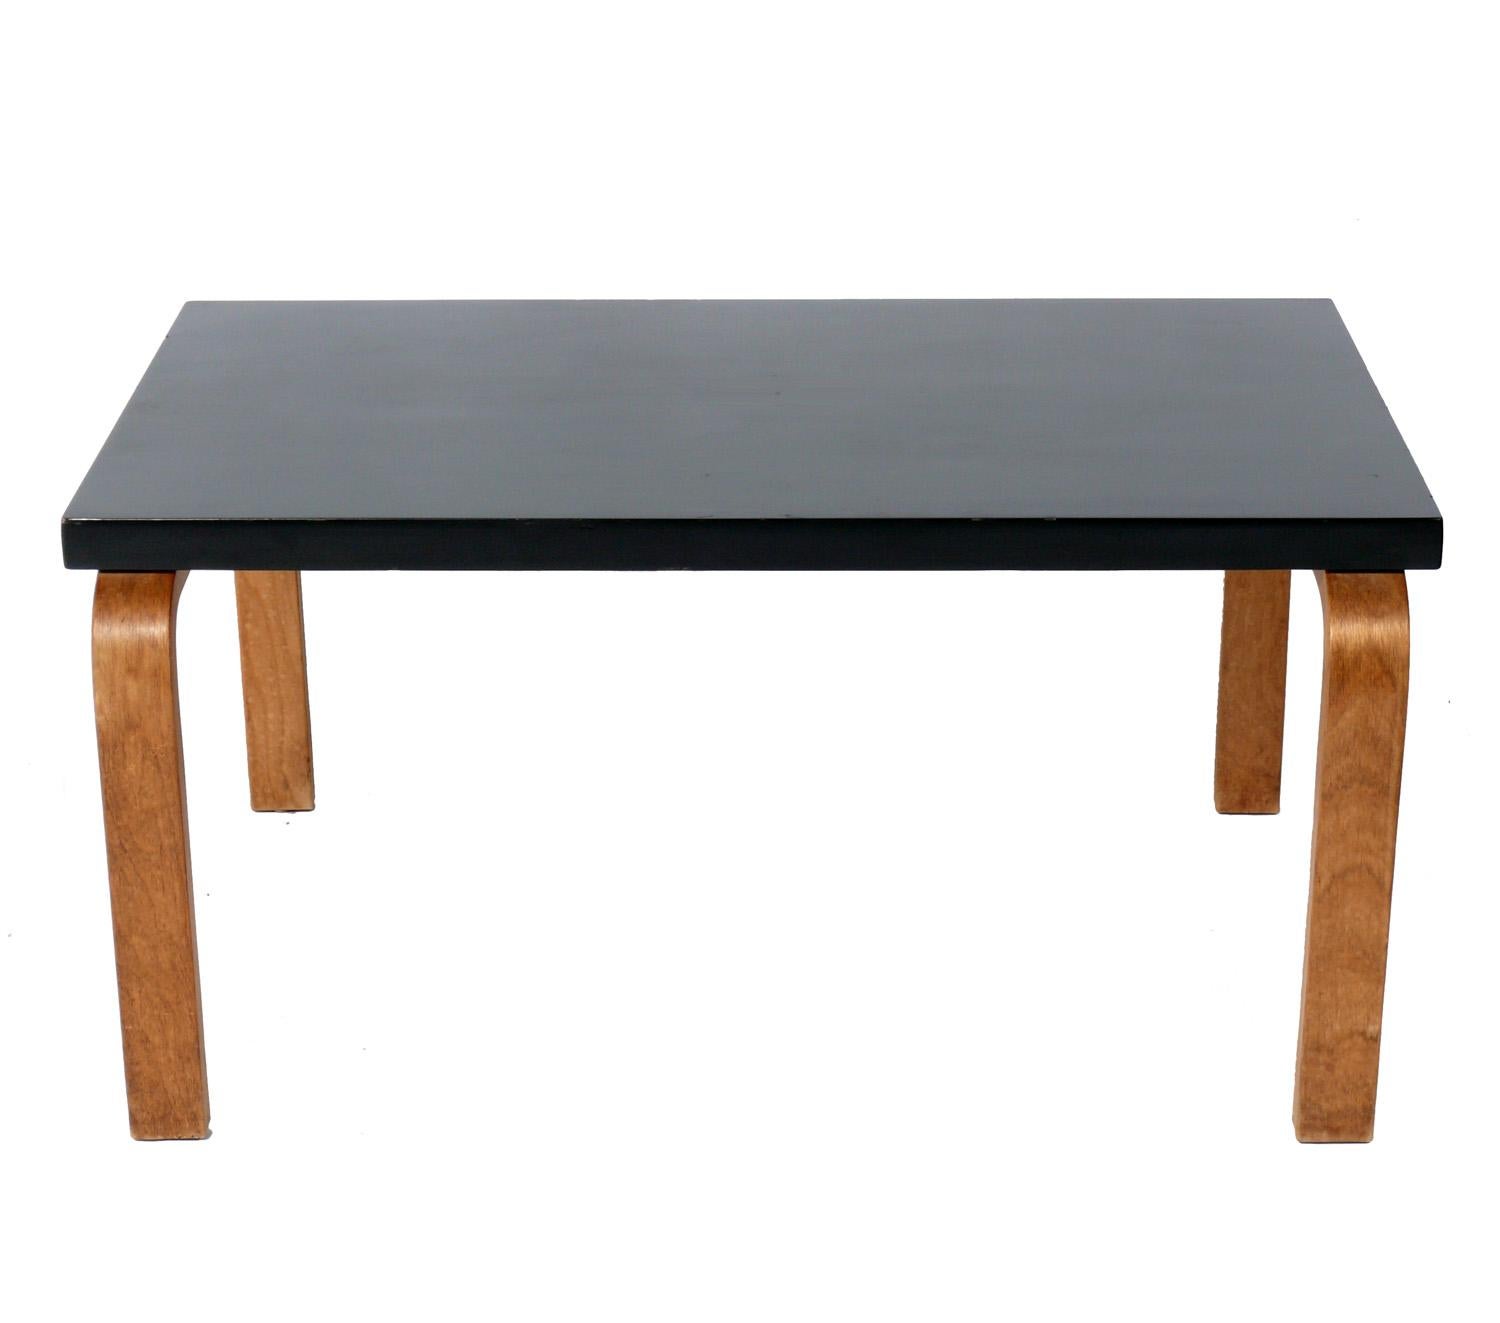 Clean lined L-leg coffee table, designed by Alvar Aalto for Artek, Finland, originally designed 1930s, this example is circa 1950s.